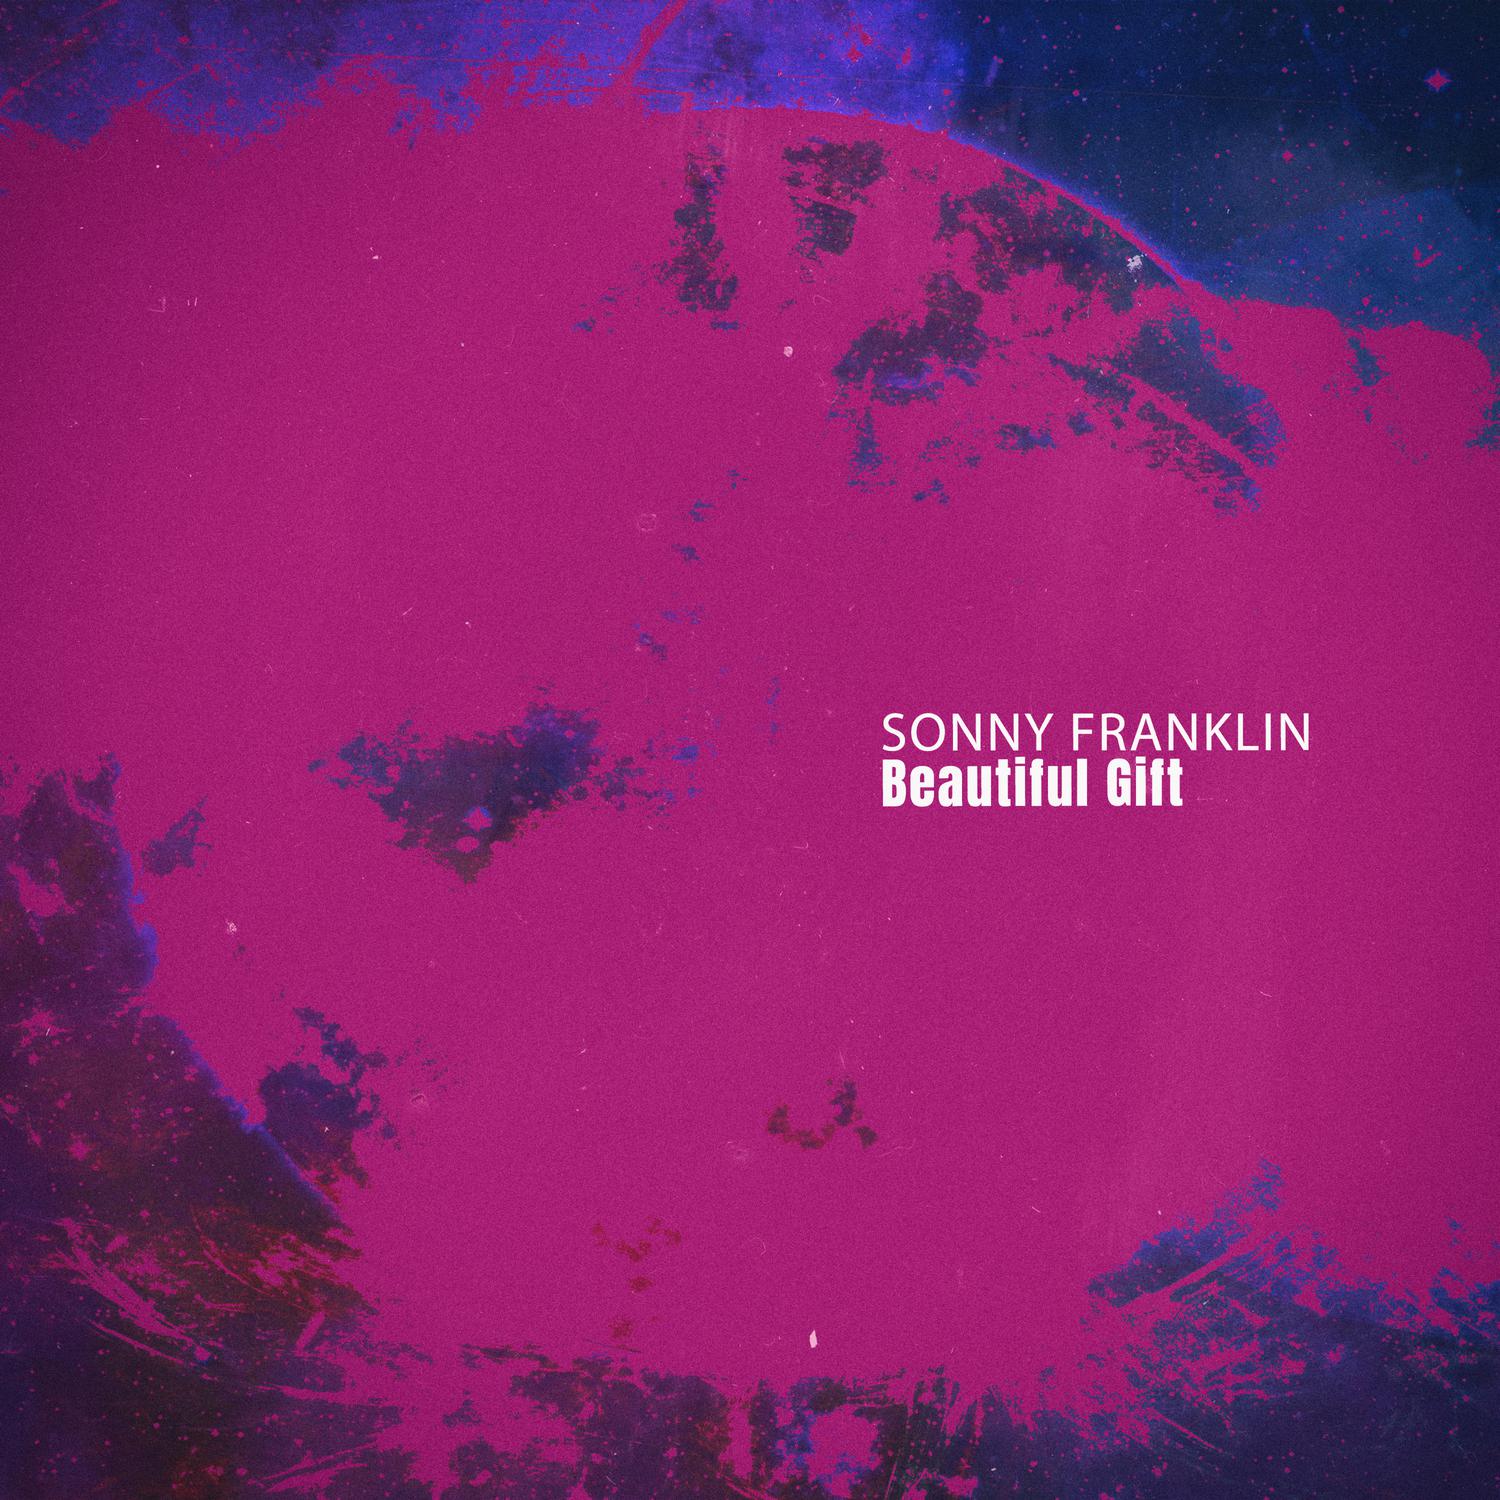 Sonny Franklin - Beautiful Gift (Special Gift Mix)